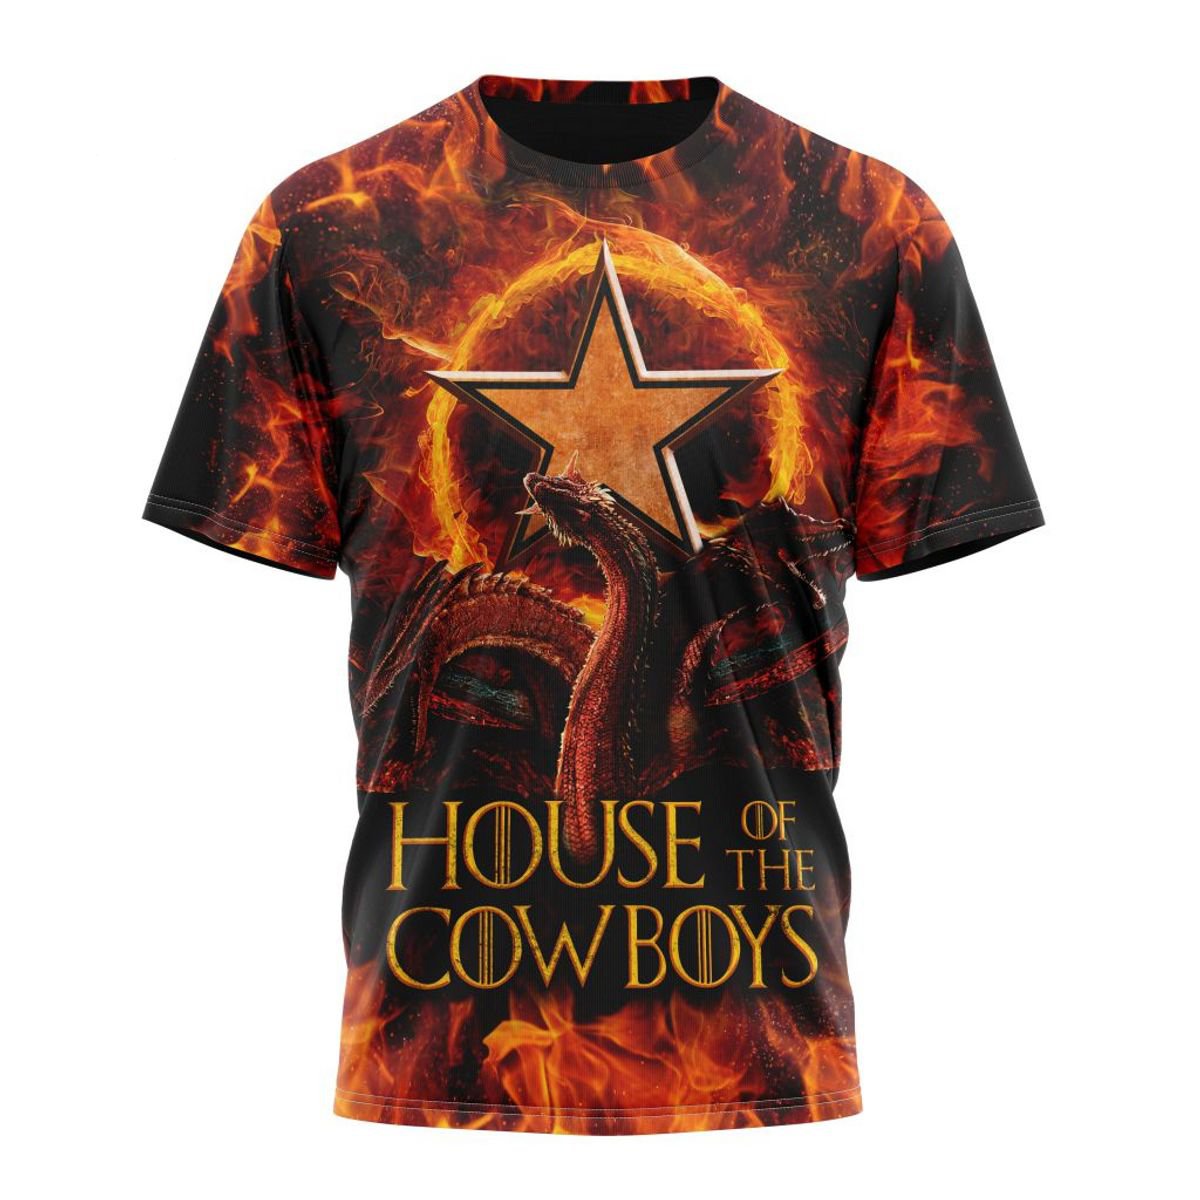 DALLAS COWBOYS GAME OF THRONES – HOUSE OF THE COWBOYS 3D HOODIE